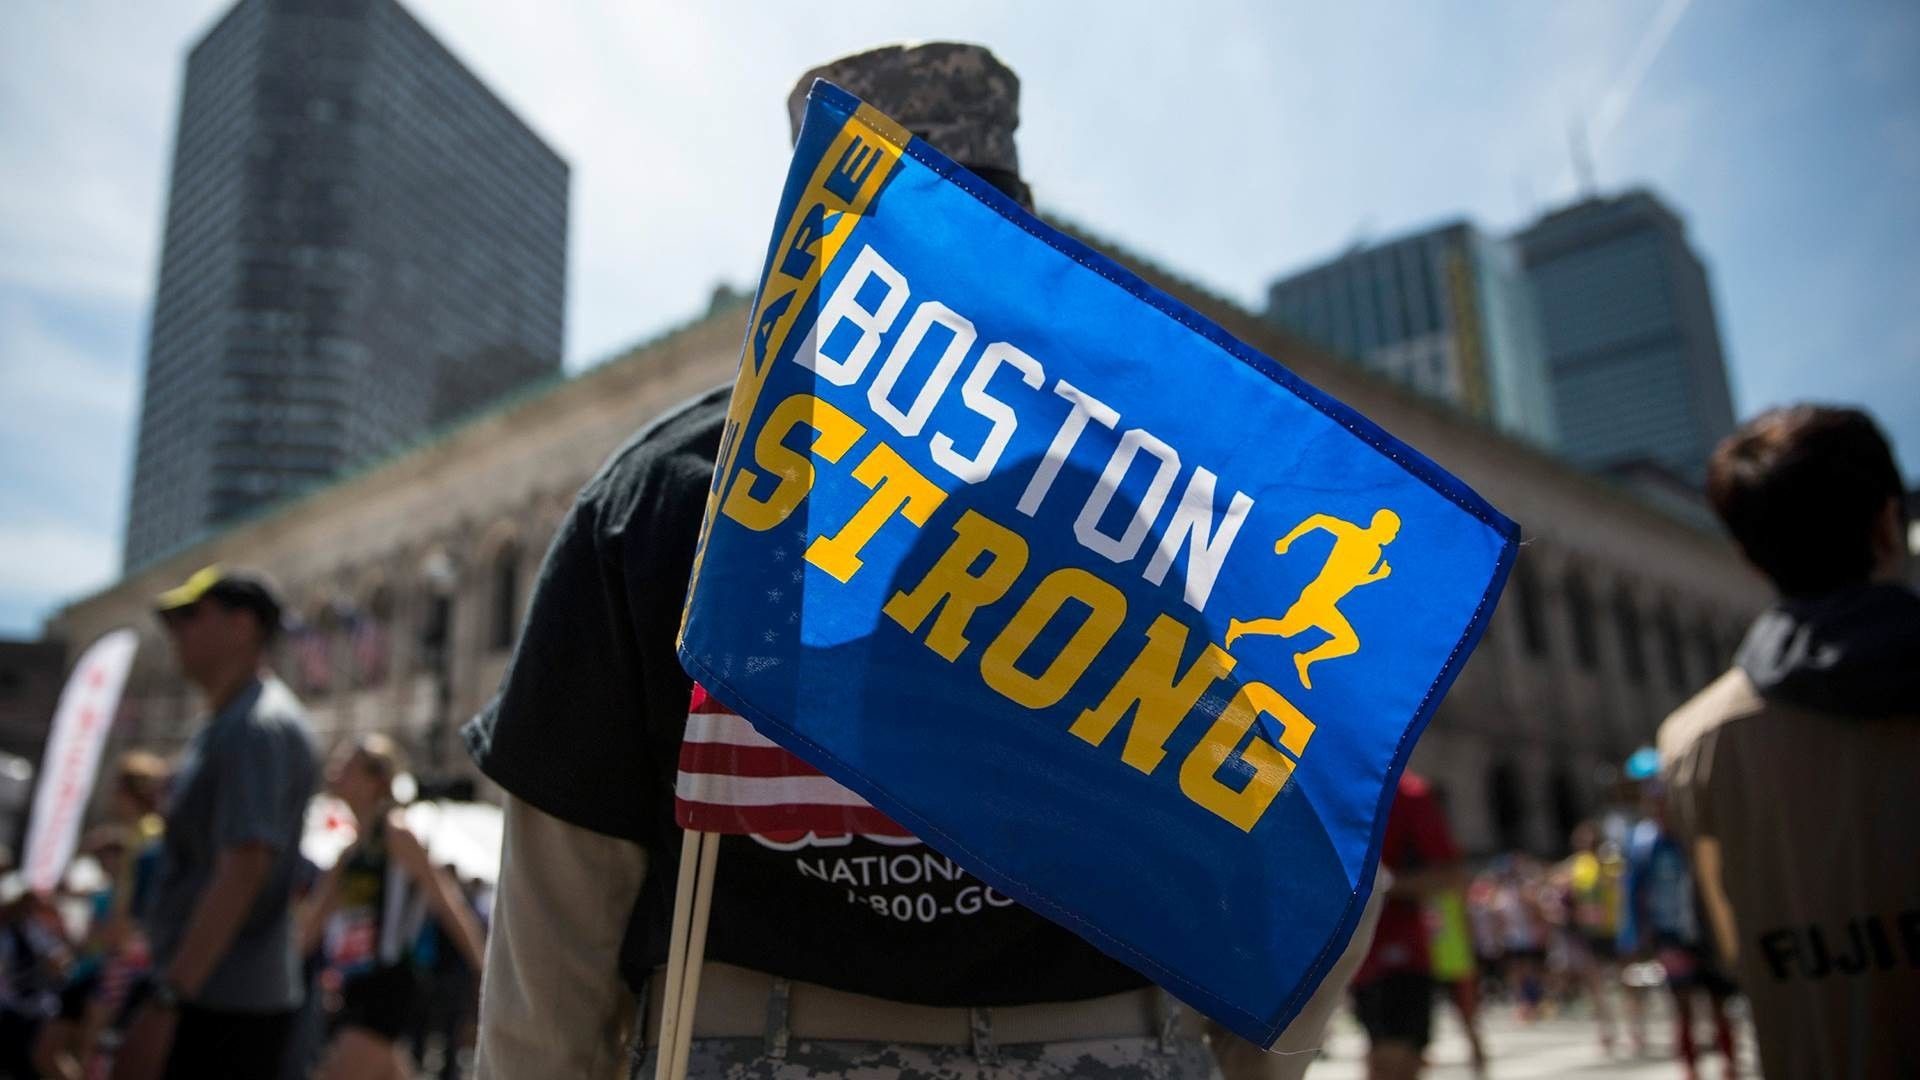 1920x1080 Boston Strong Wallpaper (75+ images)